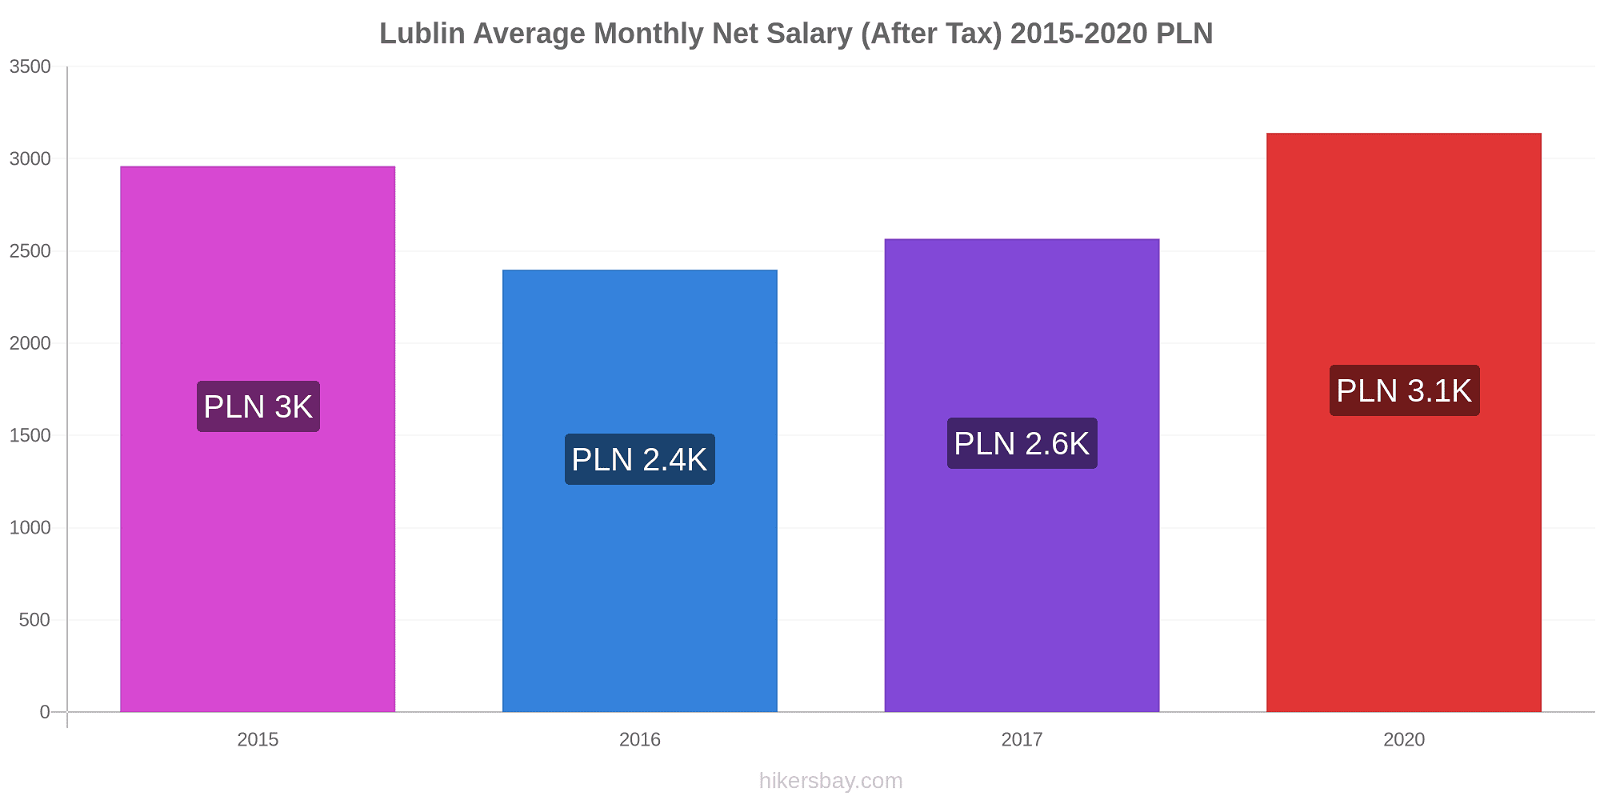 Lublin price changes Average Monthly Net Salary (After Tax) hikersbay.com